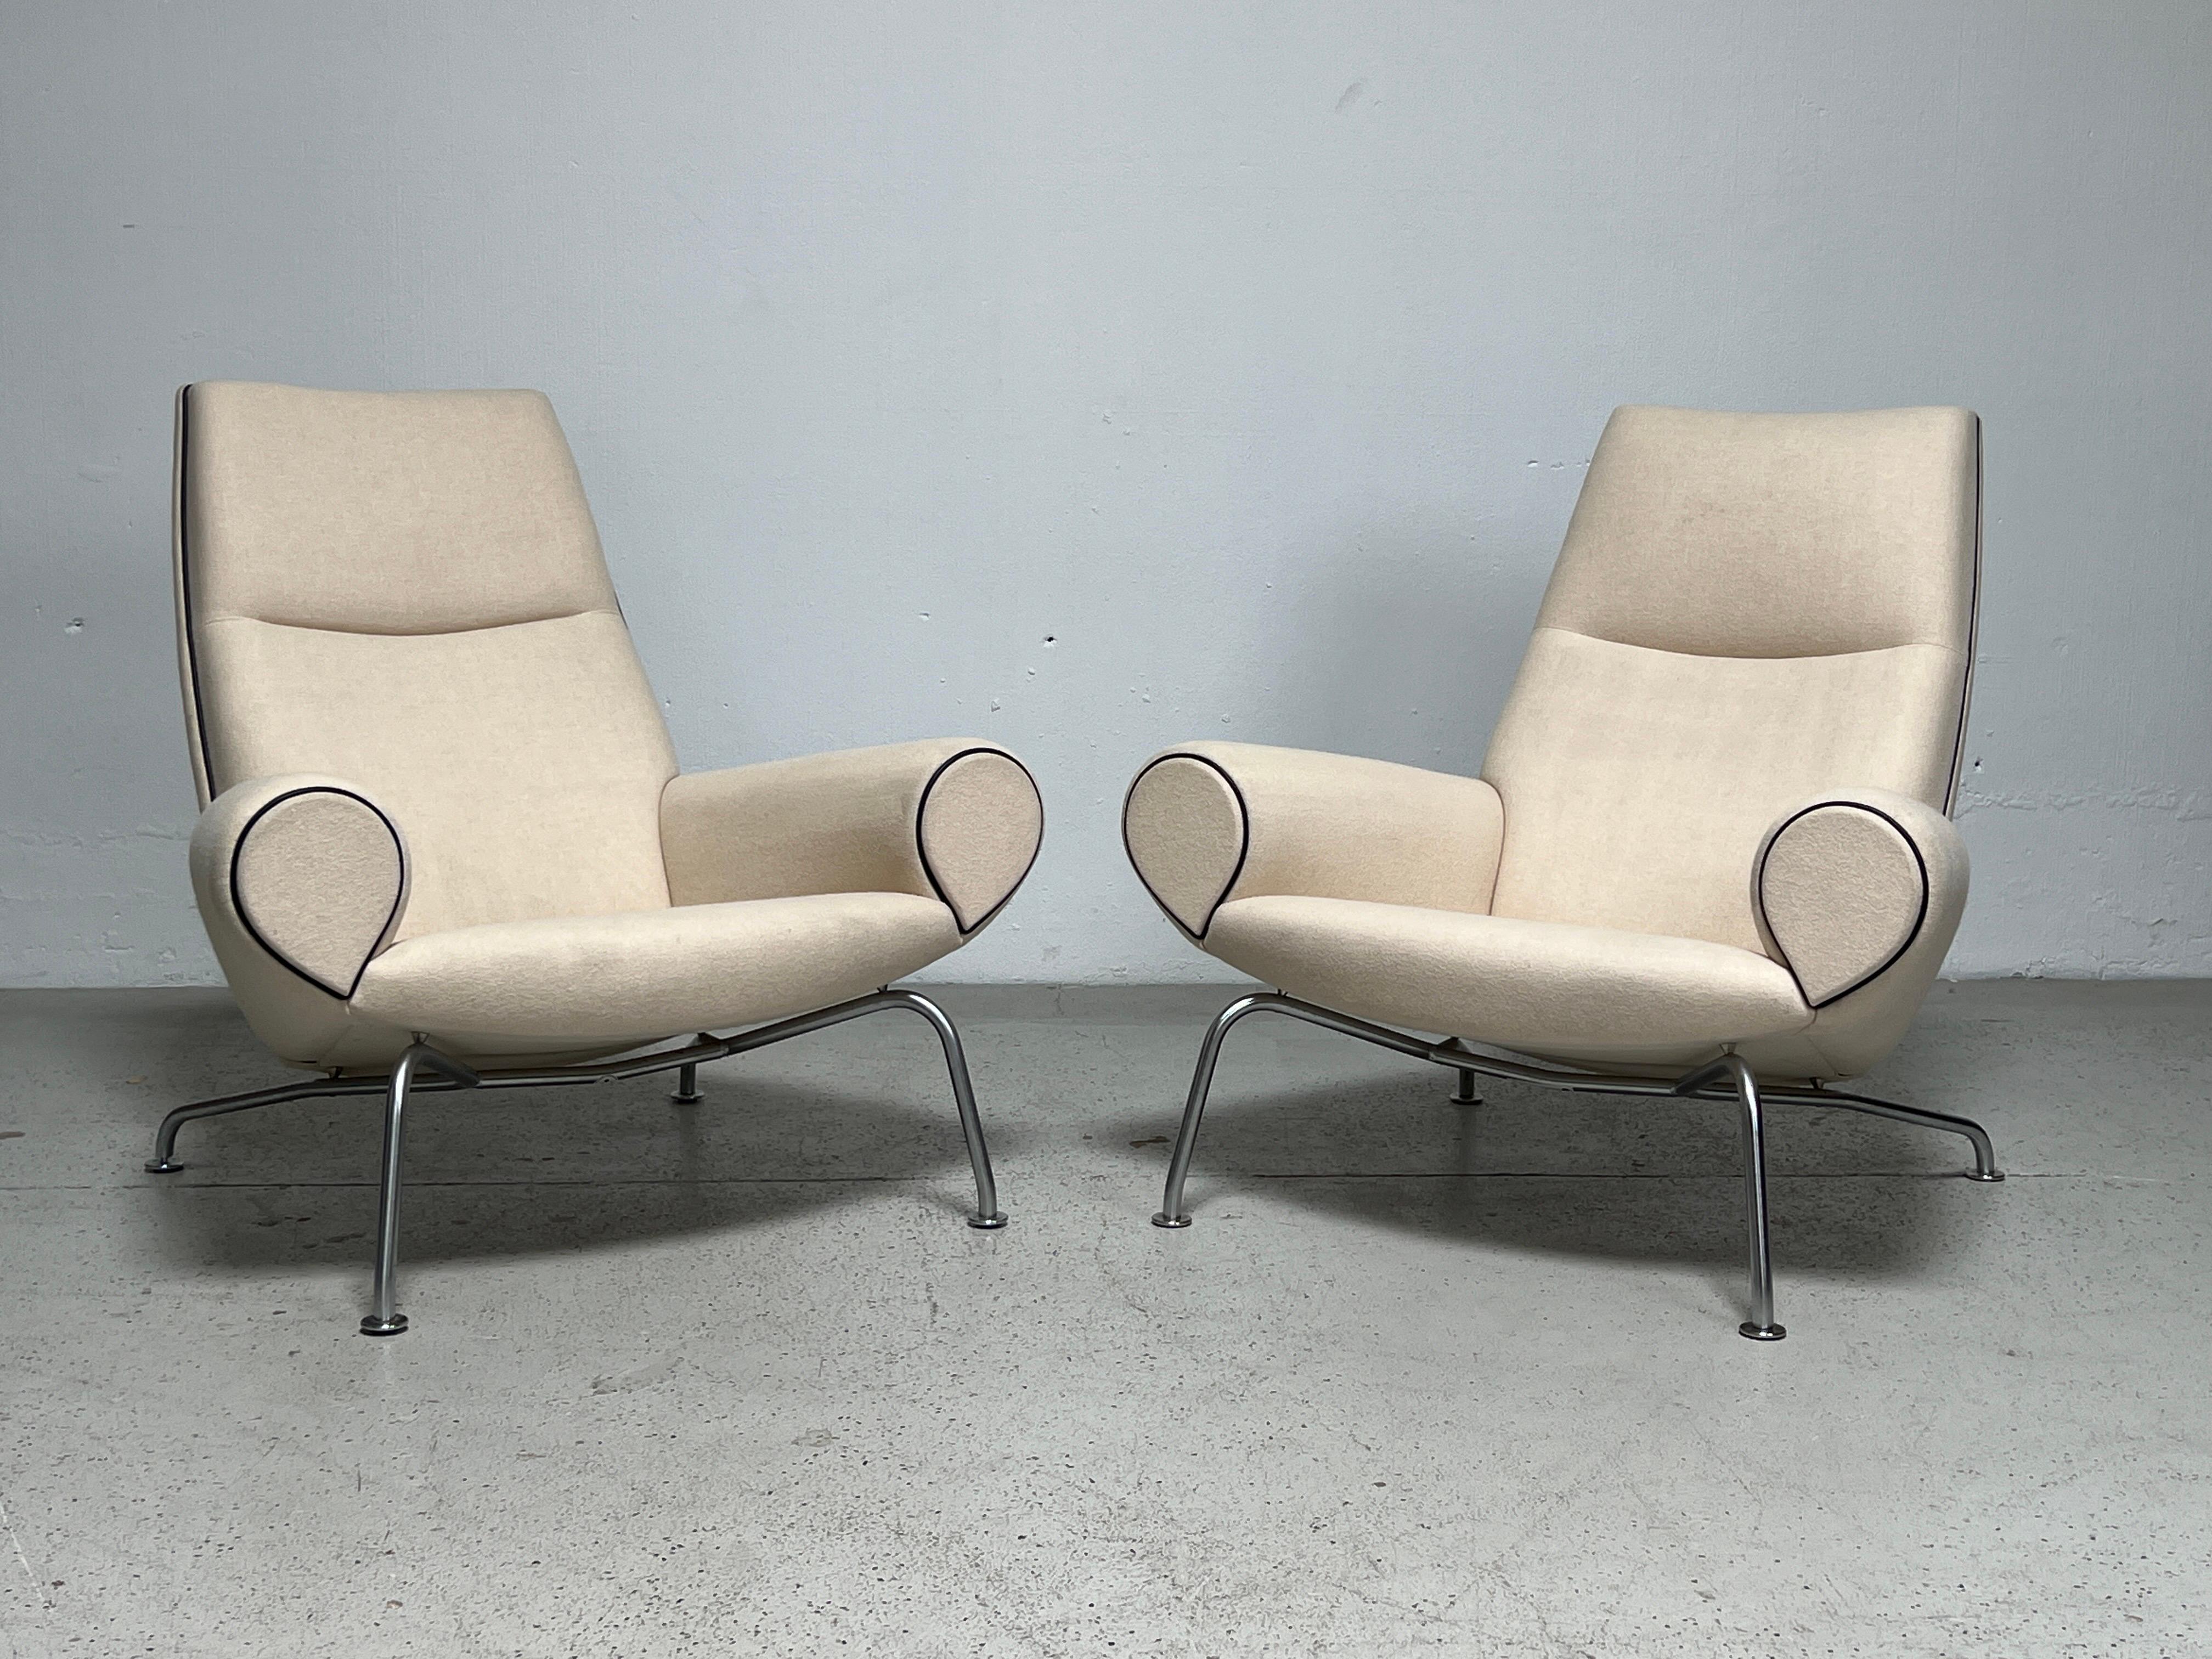 A pair of Hans Wegner Queen chairs by Erik Jørgensen. This pair made in the last 20 years with original wool upholstery with leather piping has been professionally cleaned and is in fine condition with minimal wear.